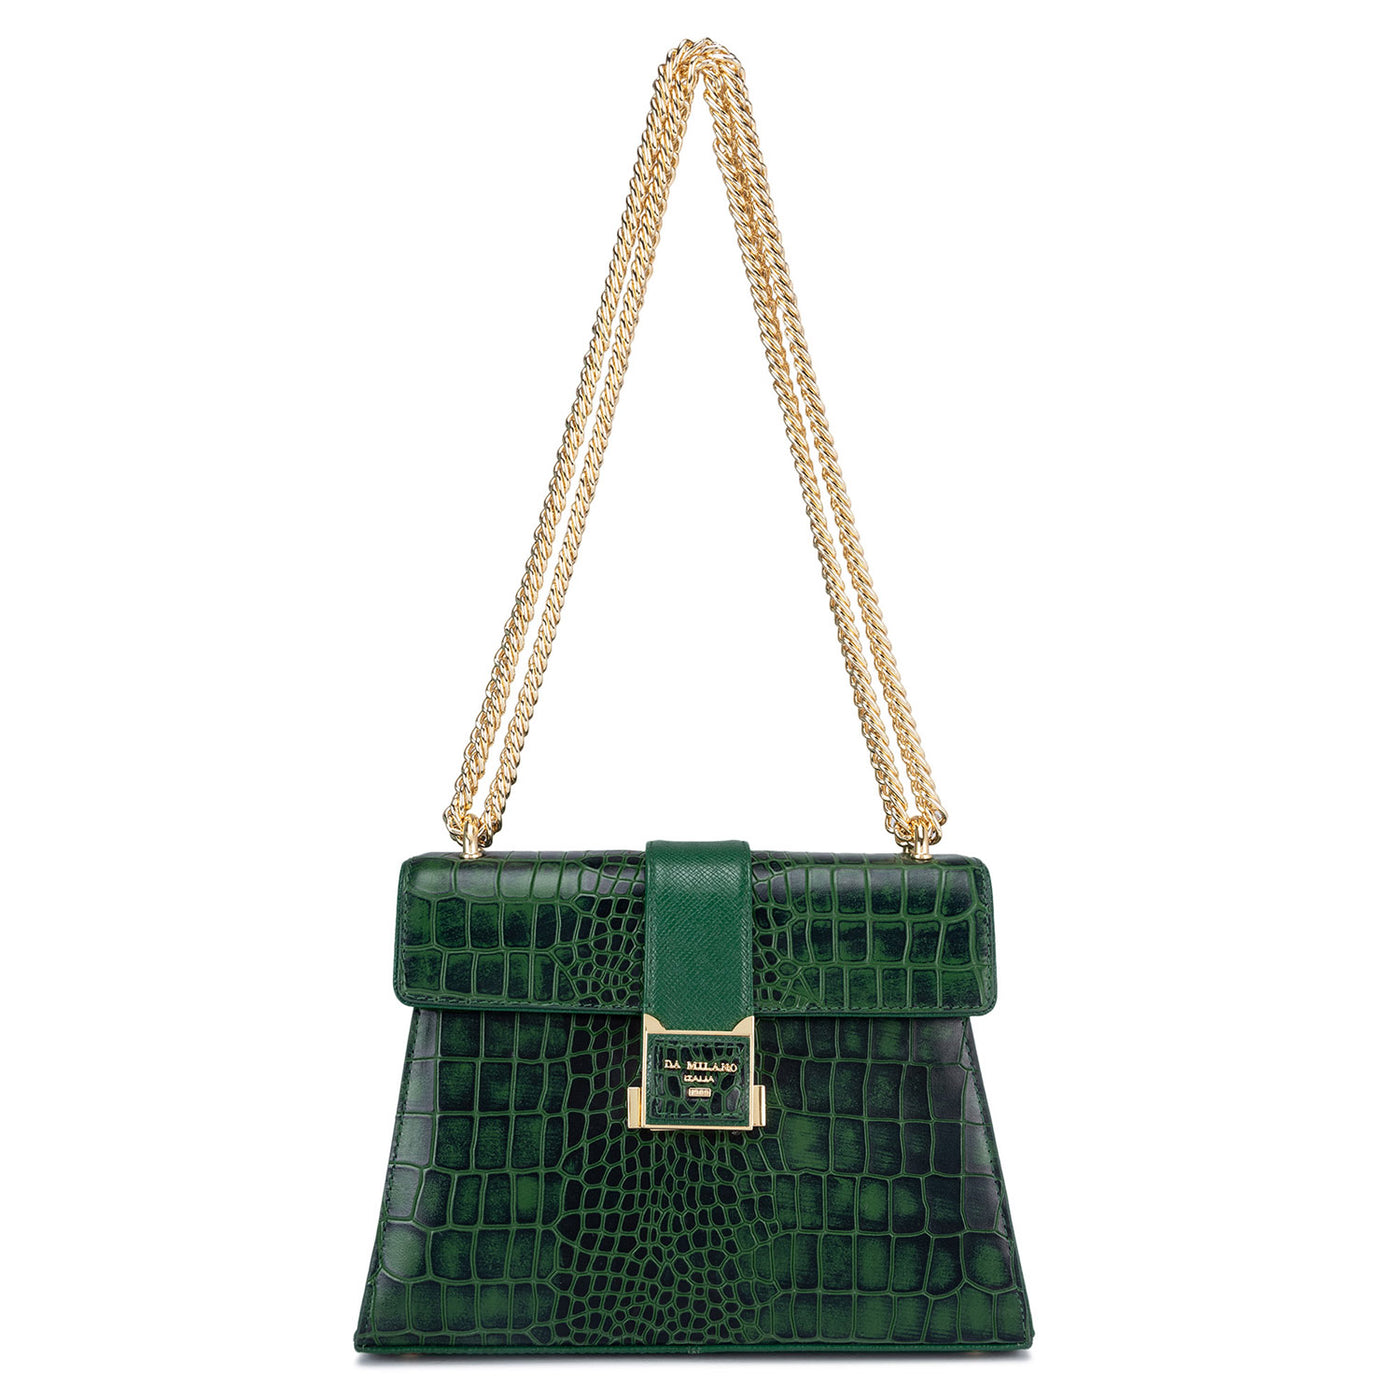 Small Croco Leather Shoulder Bag - Green